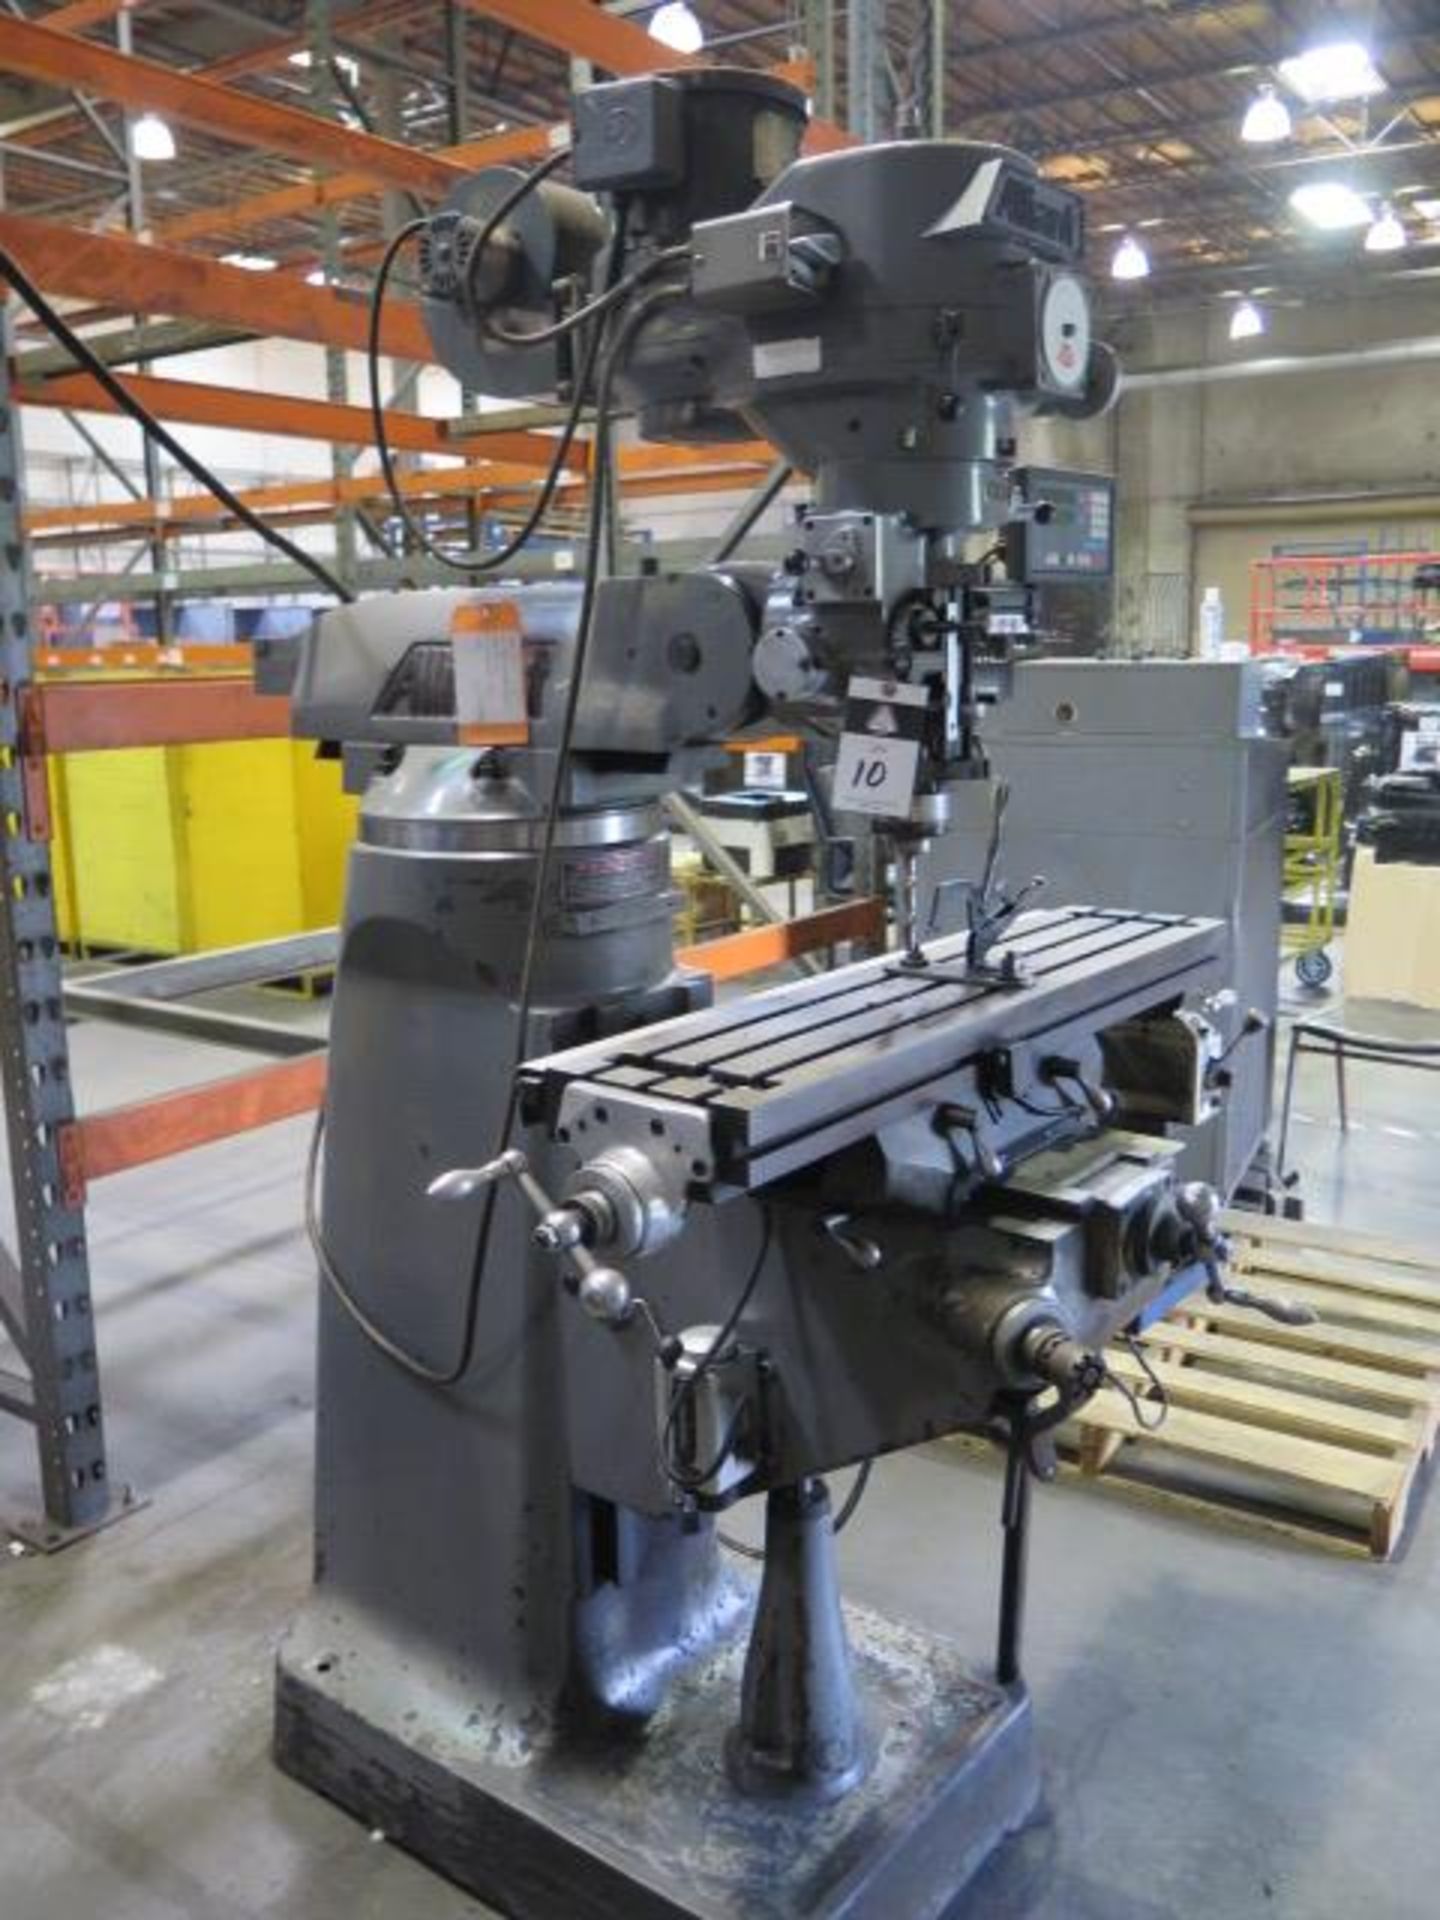 Alliant Vertical Mill s/n 61210241 w/ DRO, 2Hp Motor,60-4500 Dial Change RPM, Chrome ways,SOLD AS IS - Image 3 of 16